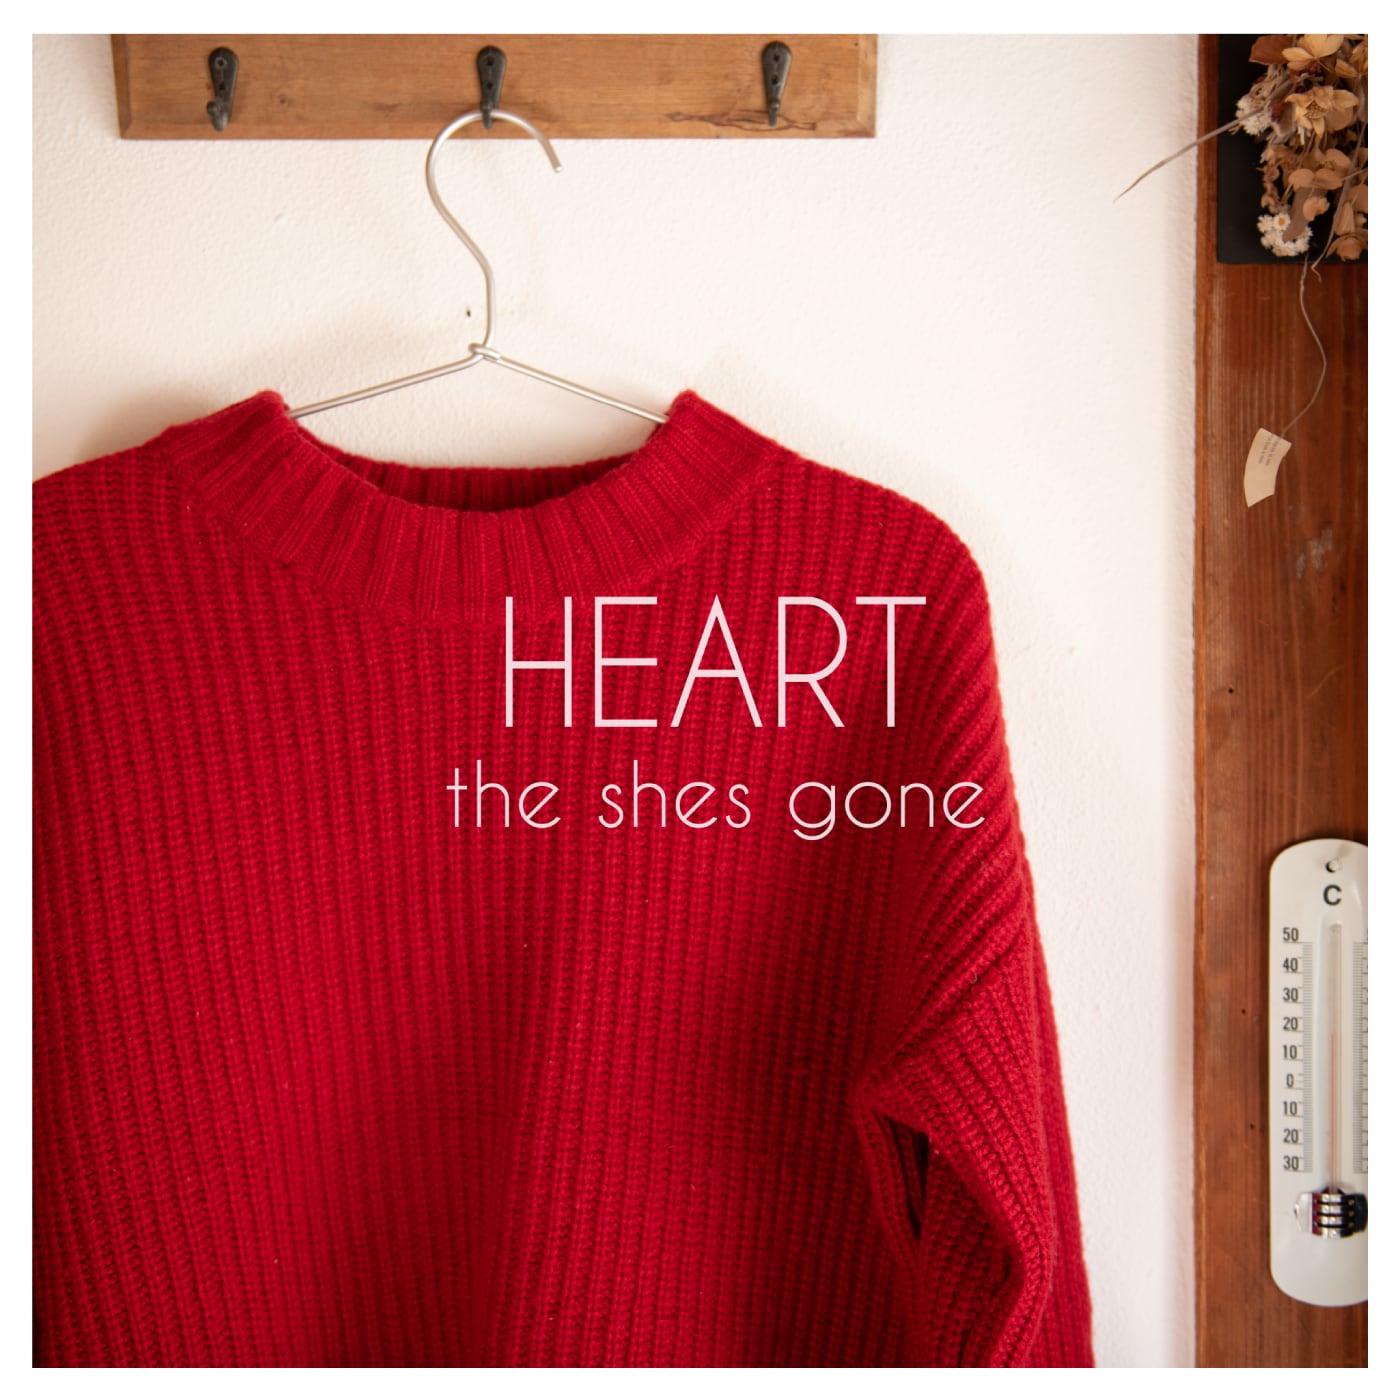 HEART/the　gone　shes　UKCD-1212　Ratspack　Records